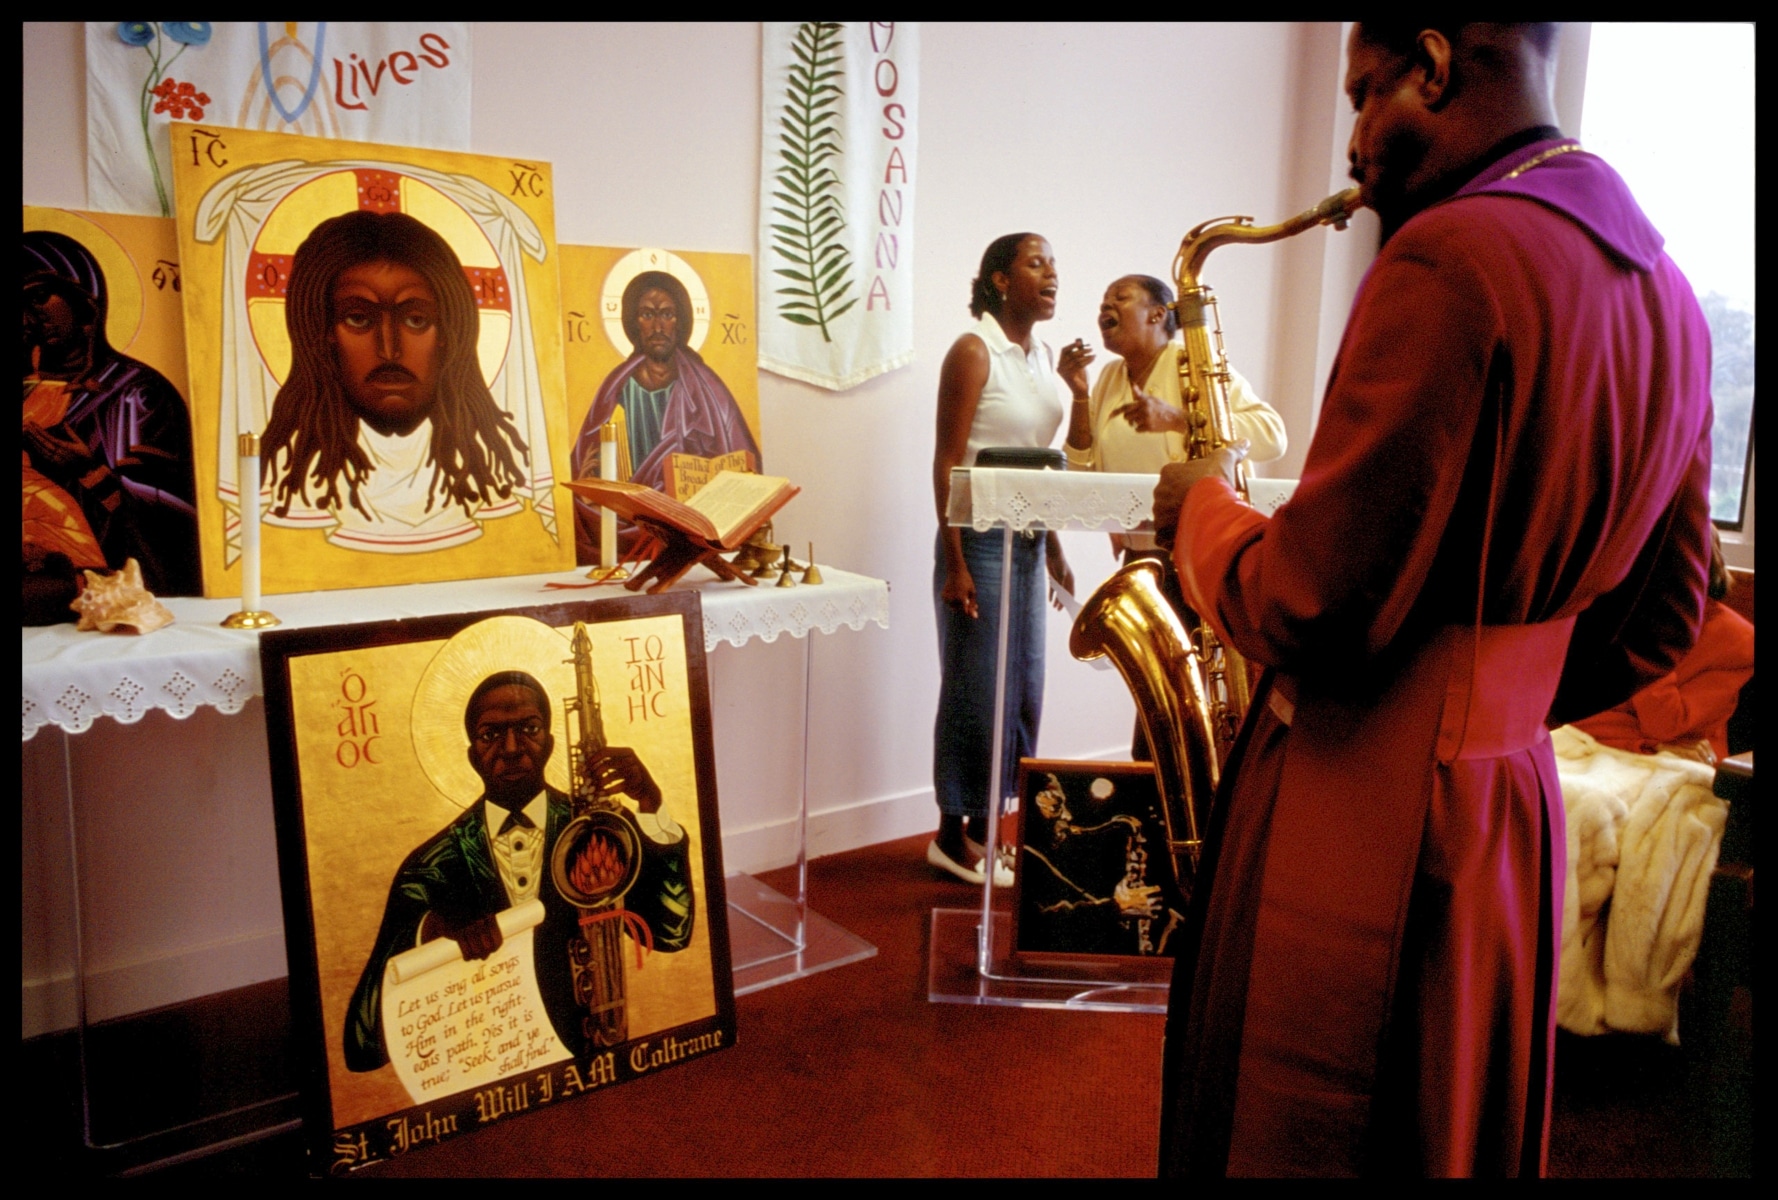 San Francisco's Church of John Coltrane venerates Coltrane and devoted themselves to playing his music